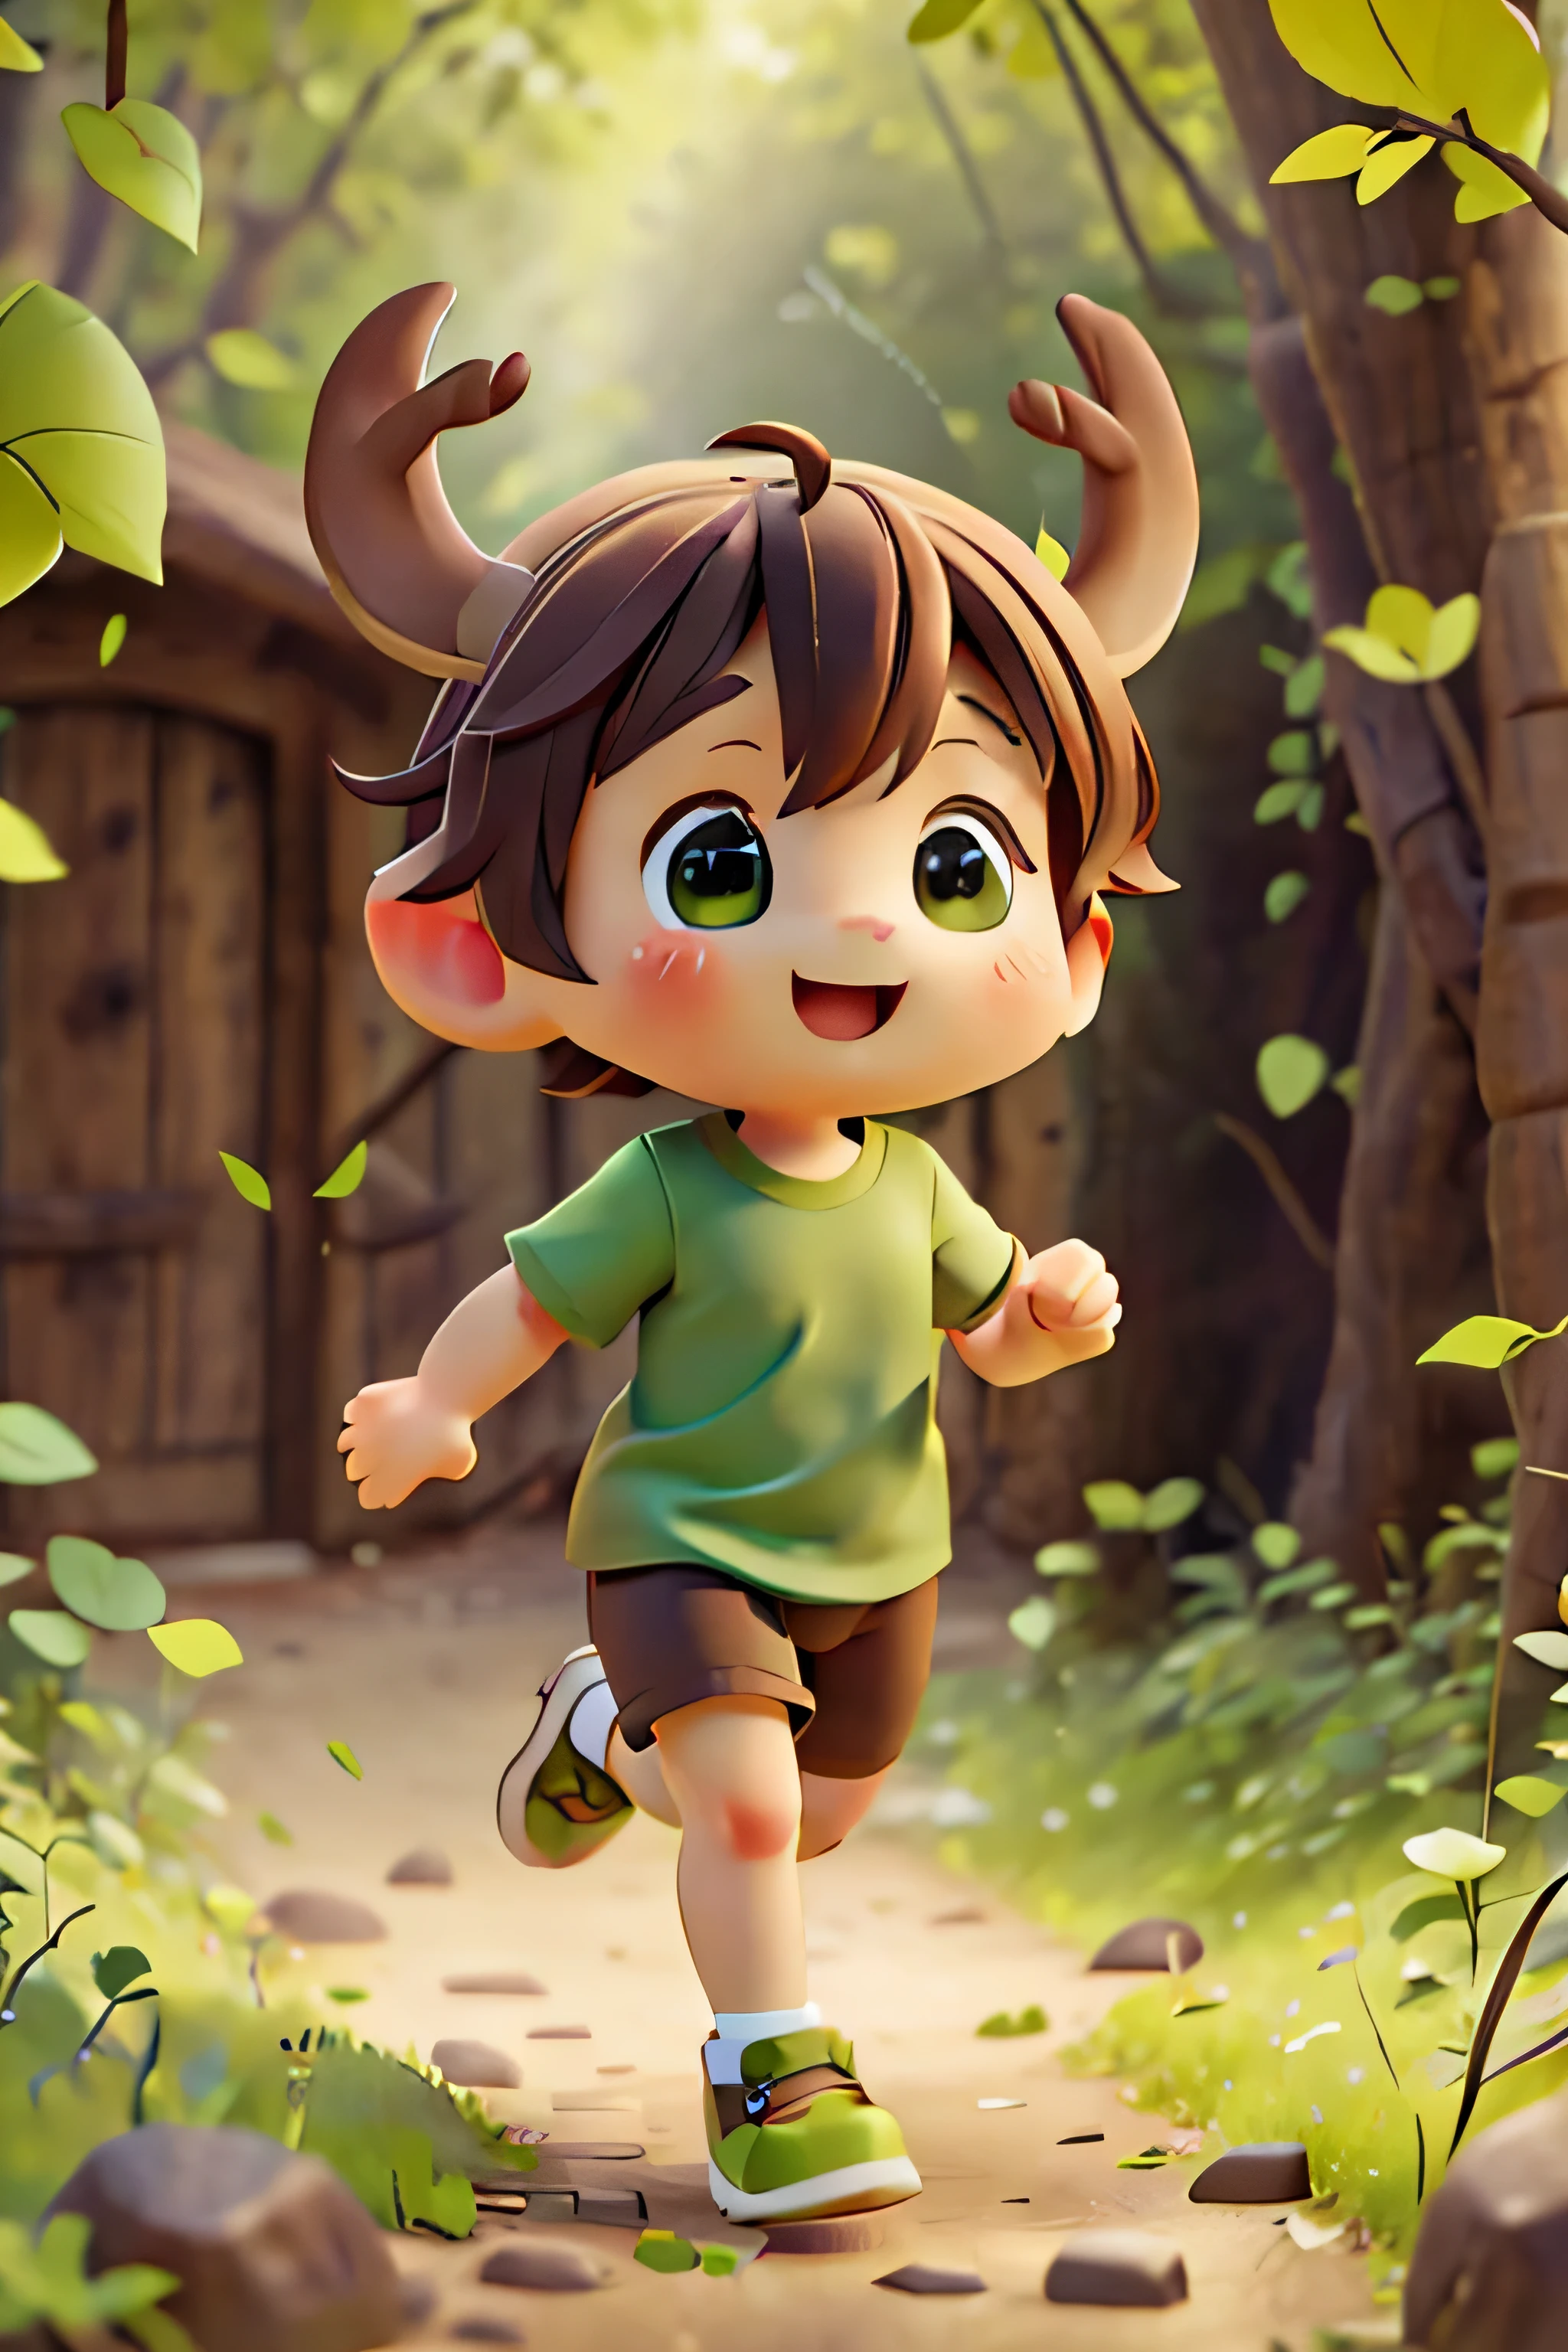 Little deer, cute, cheerful, wearing a green t-shirt, wearing running shoes, running happily, with no background.